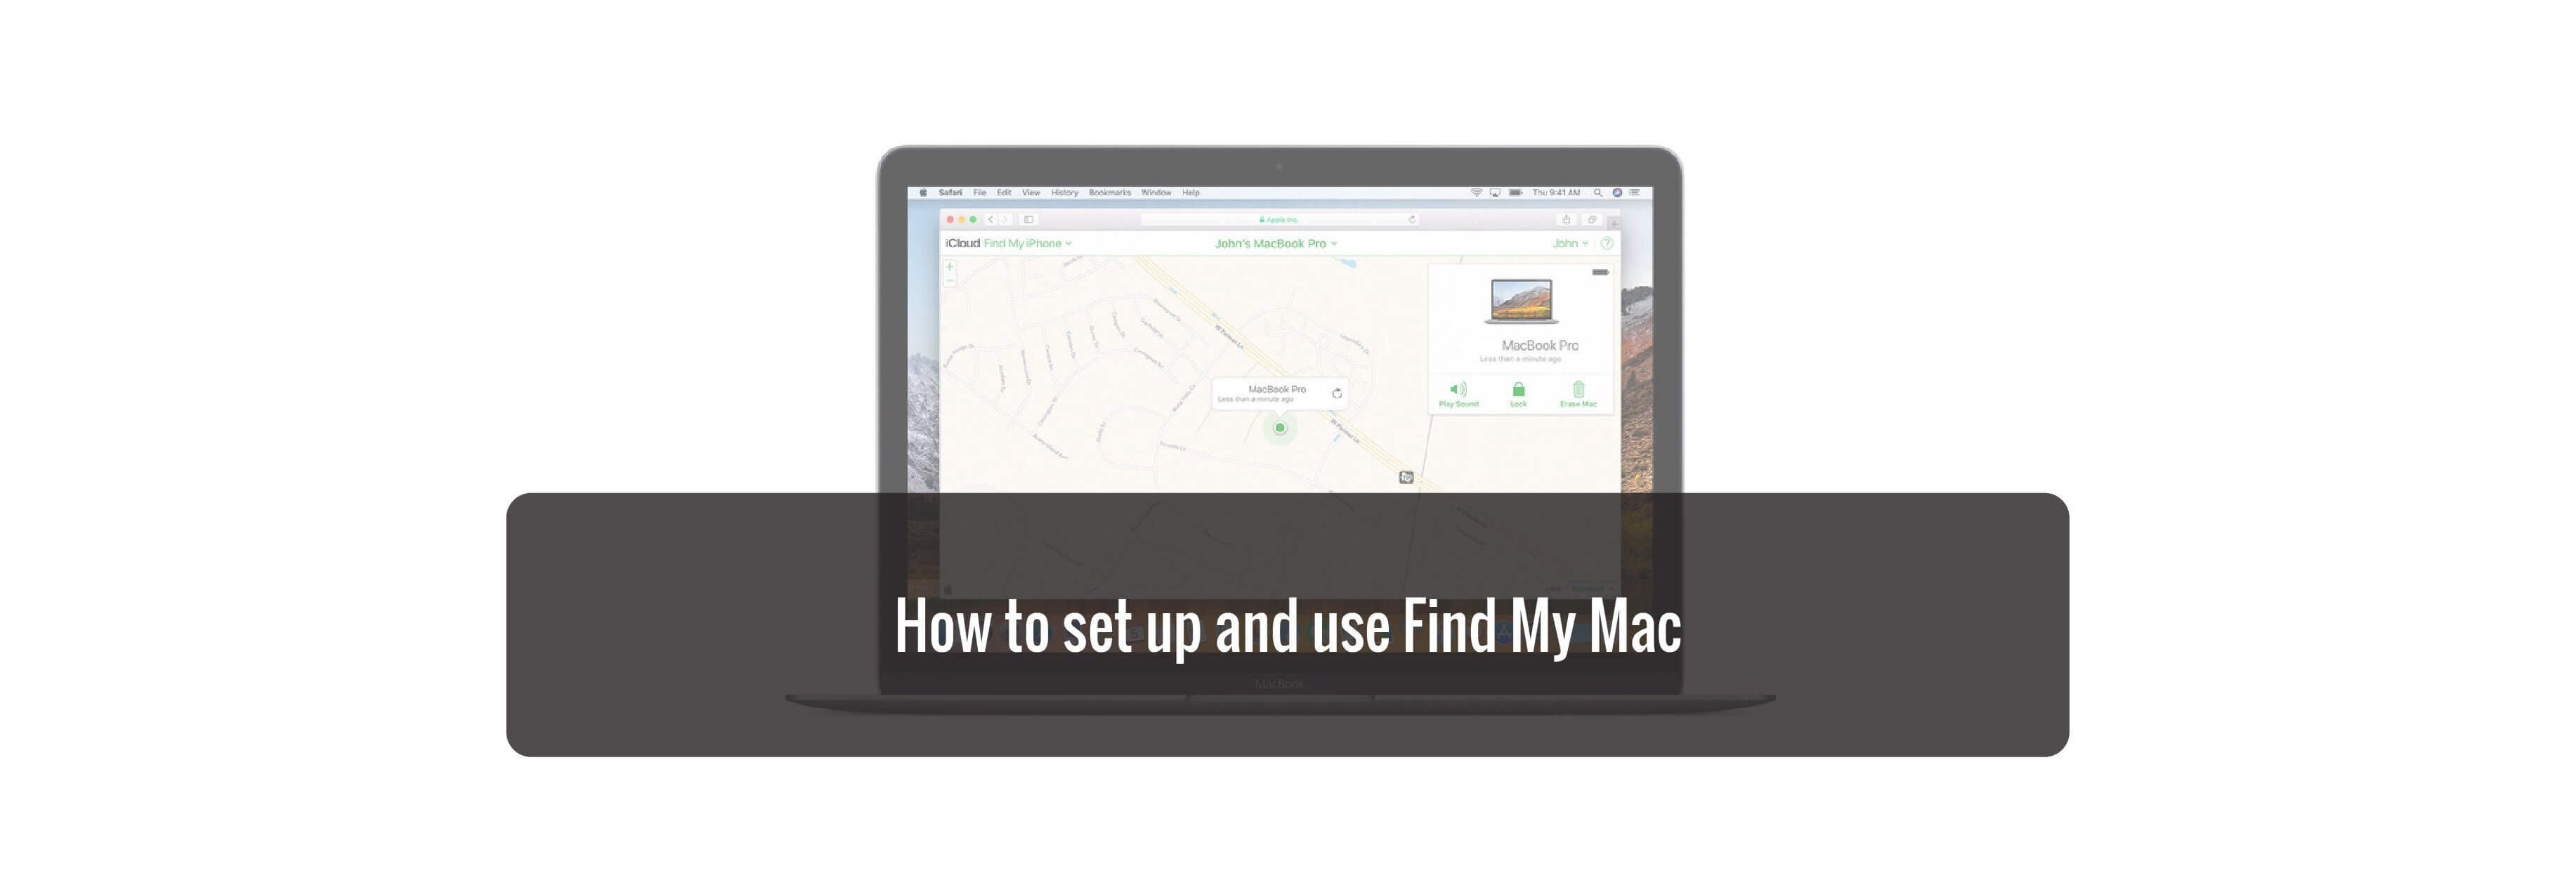 How to set up and use Find My Mac